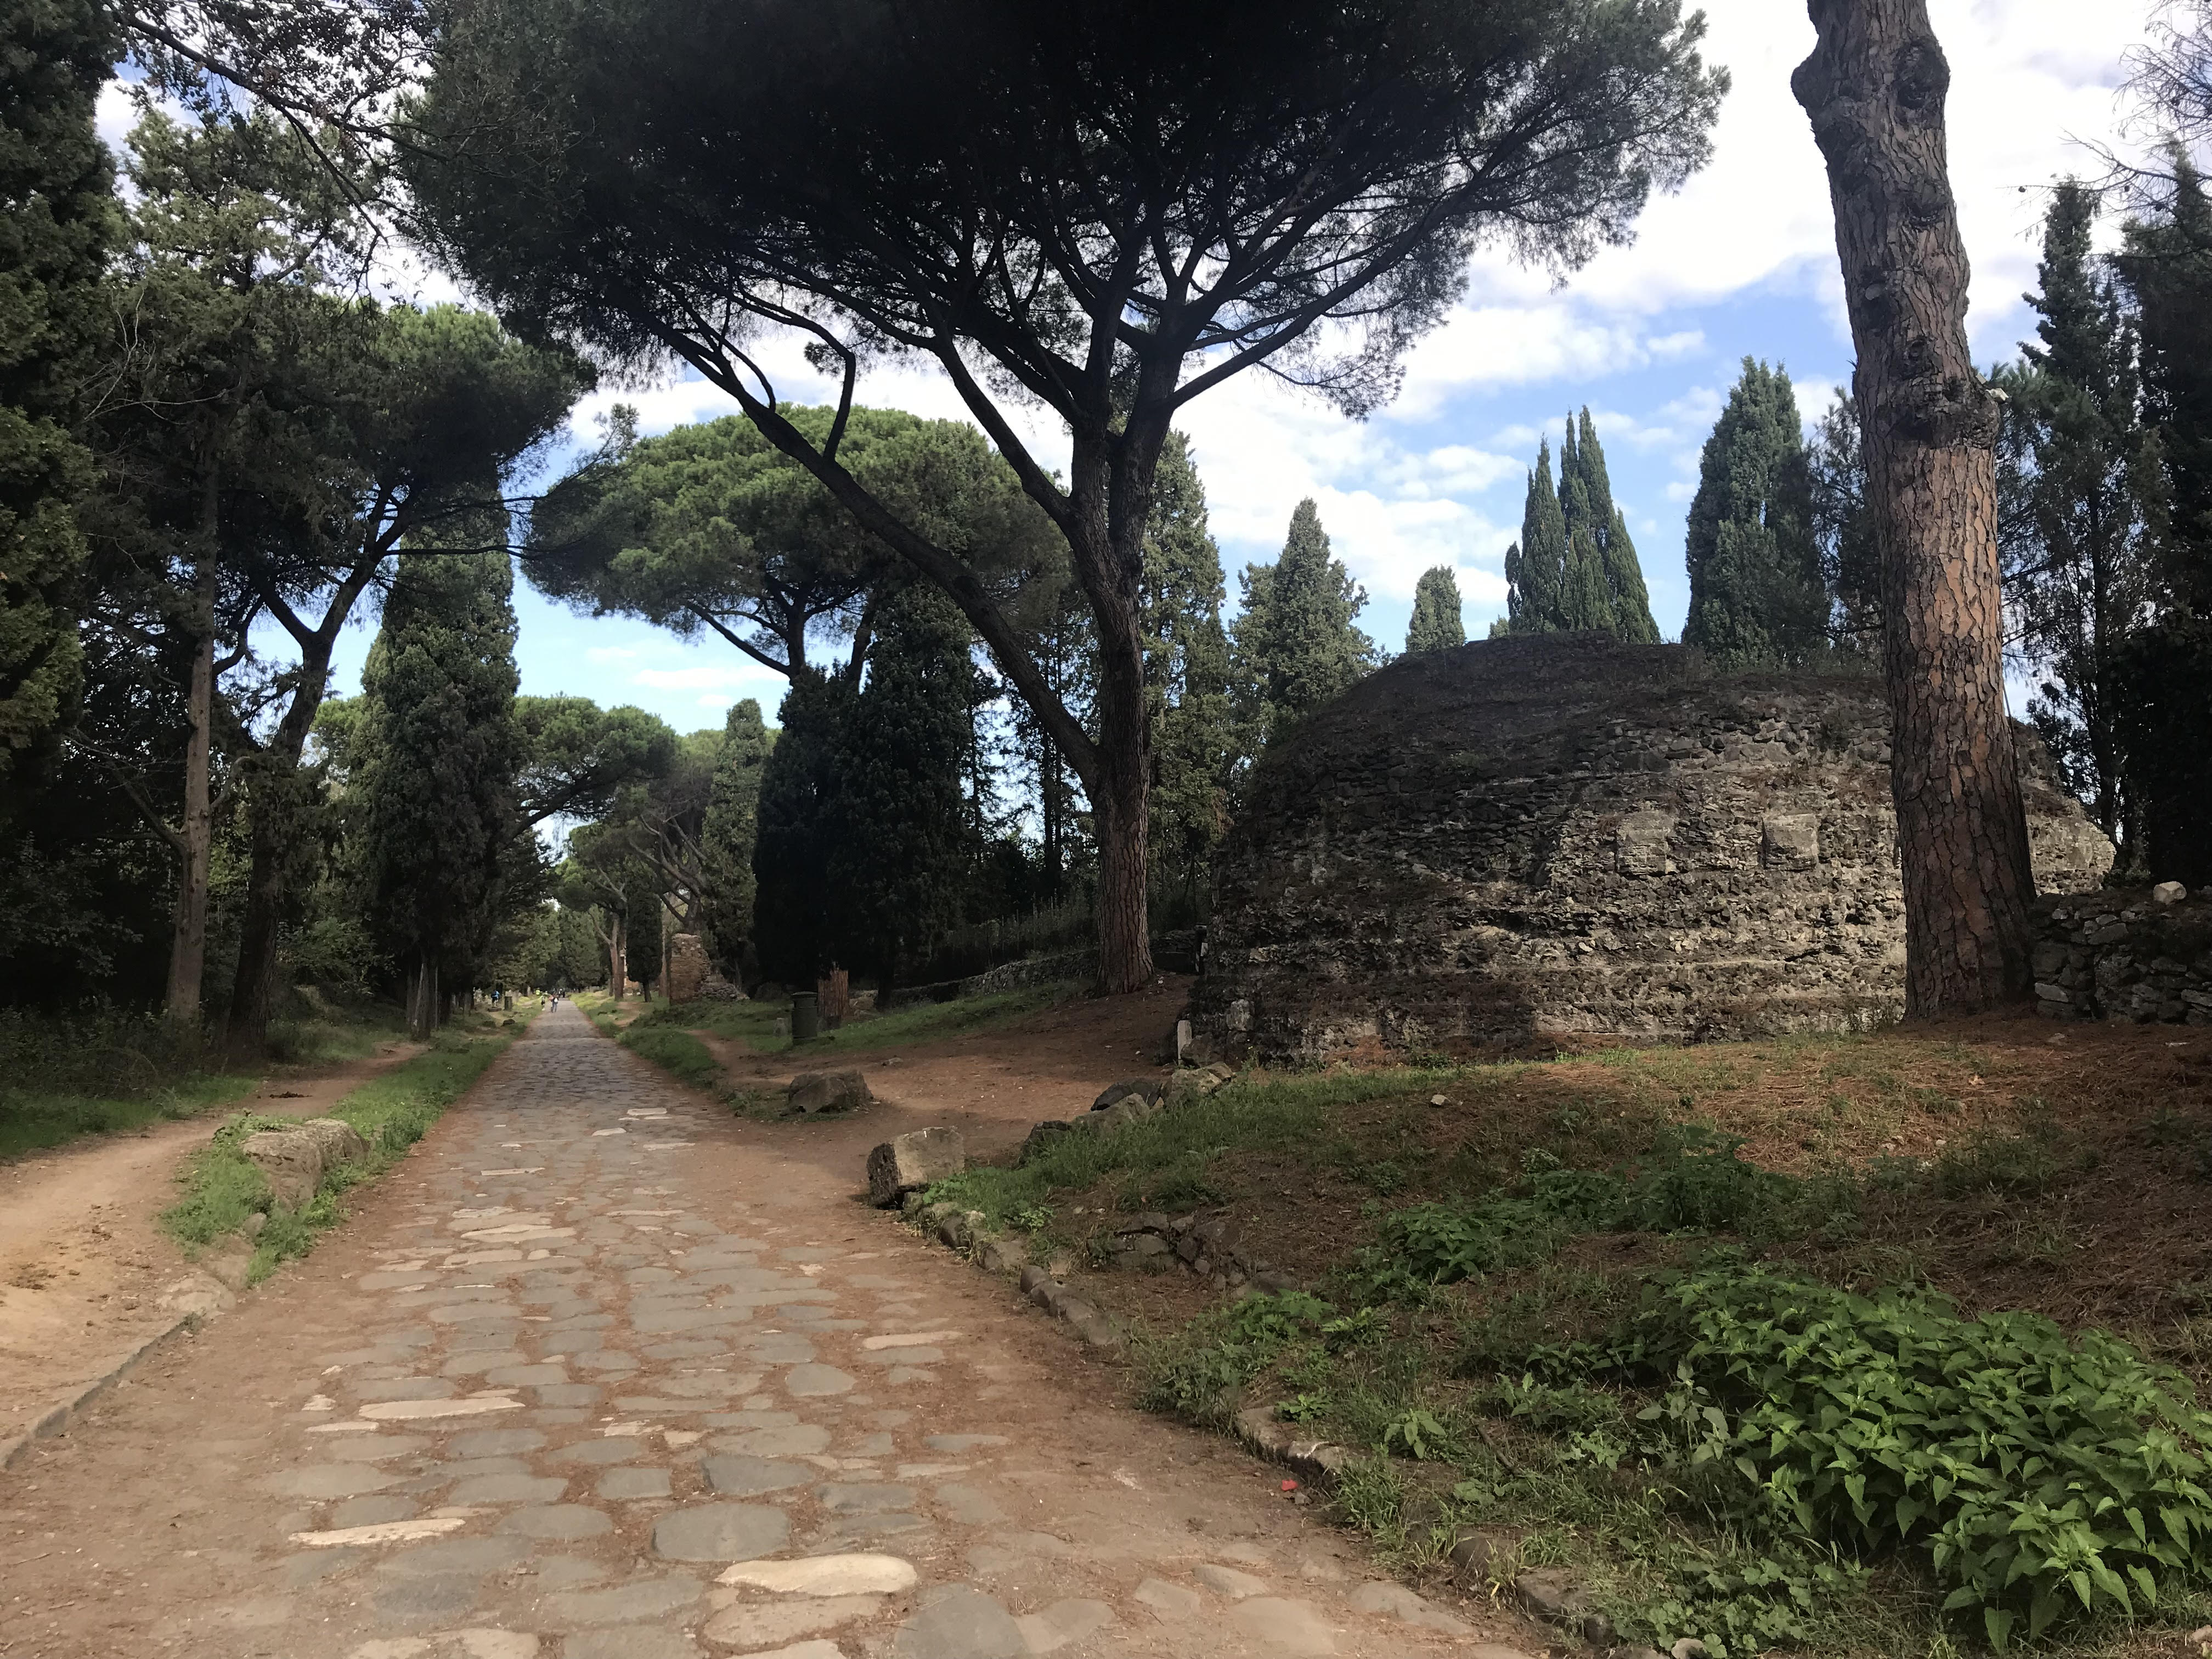 Via Appia - Great Reads